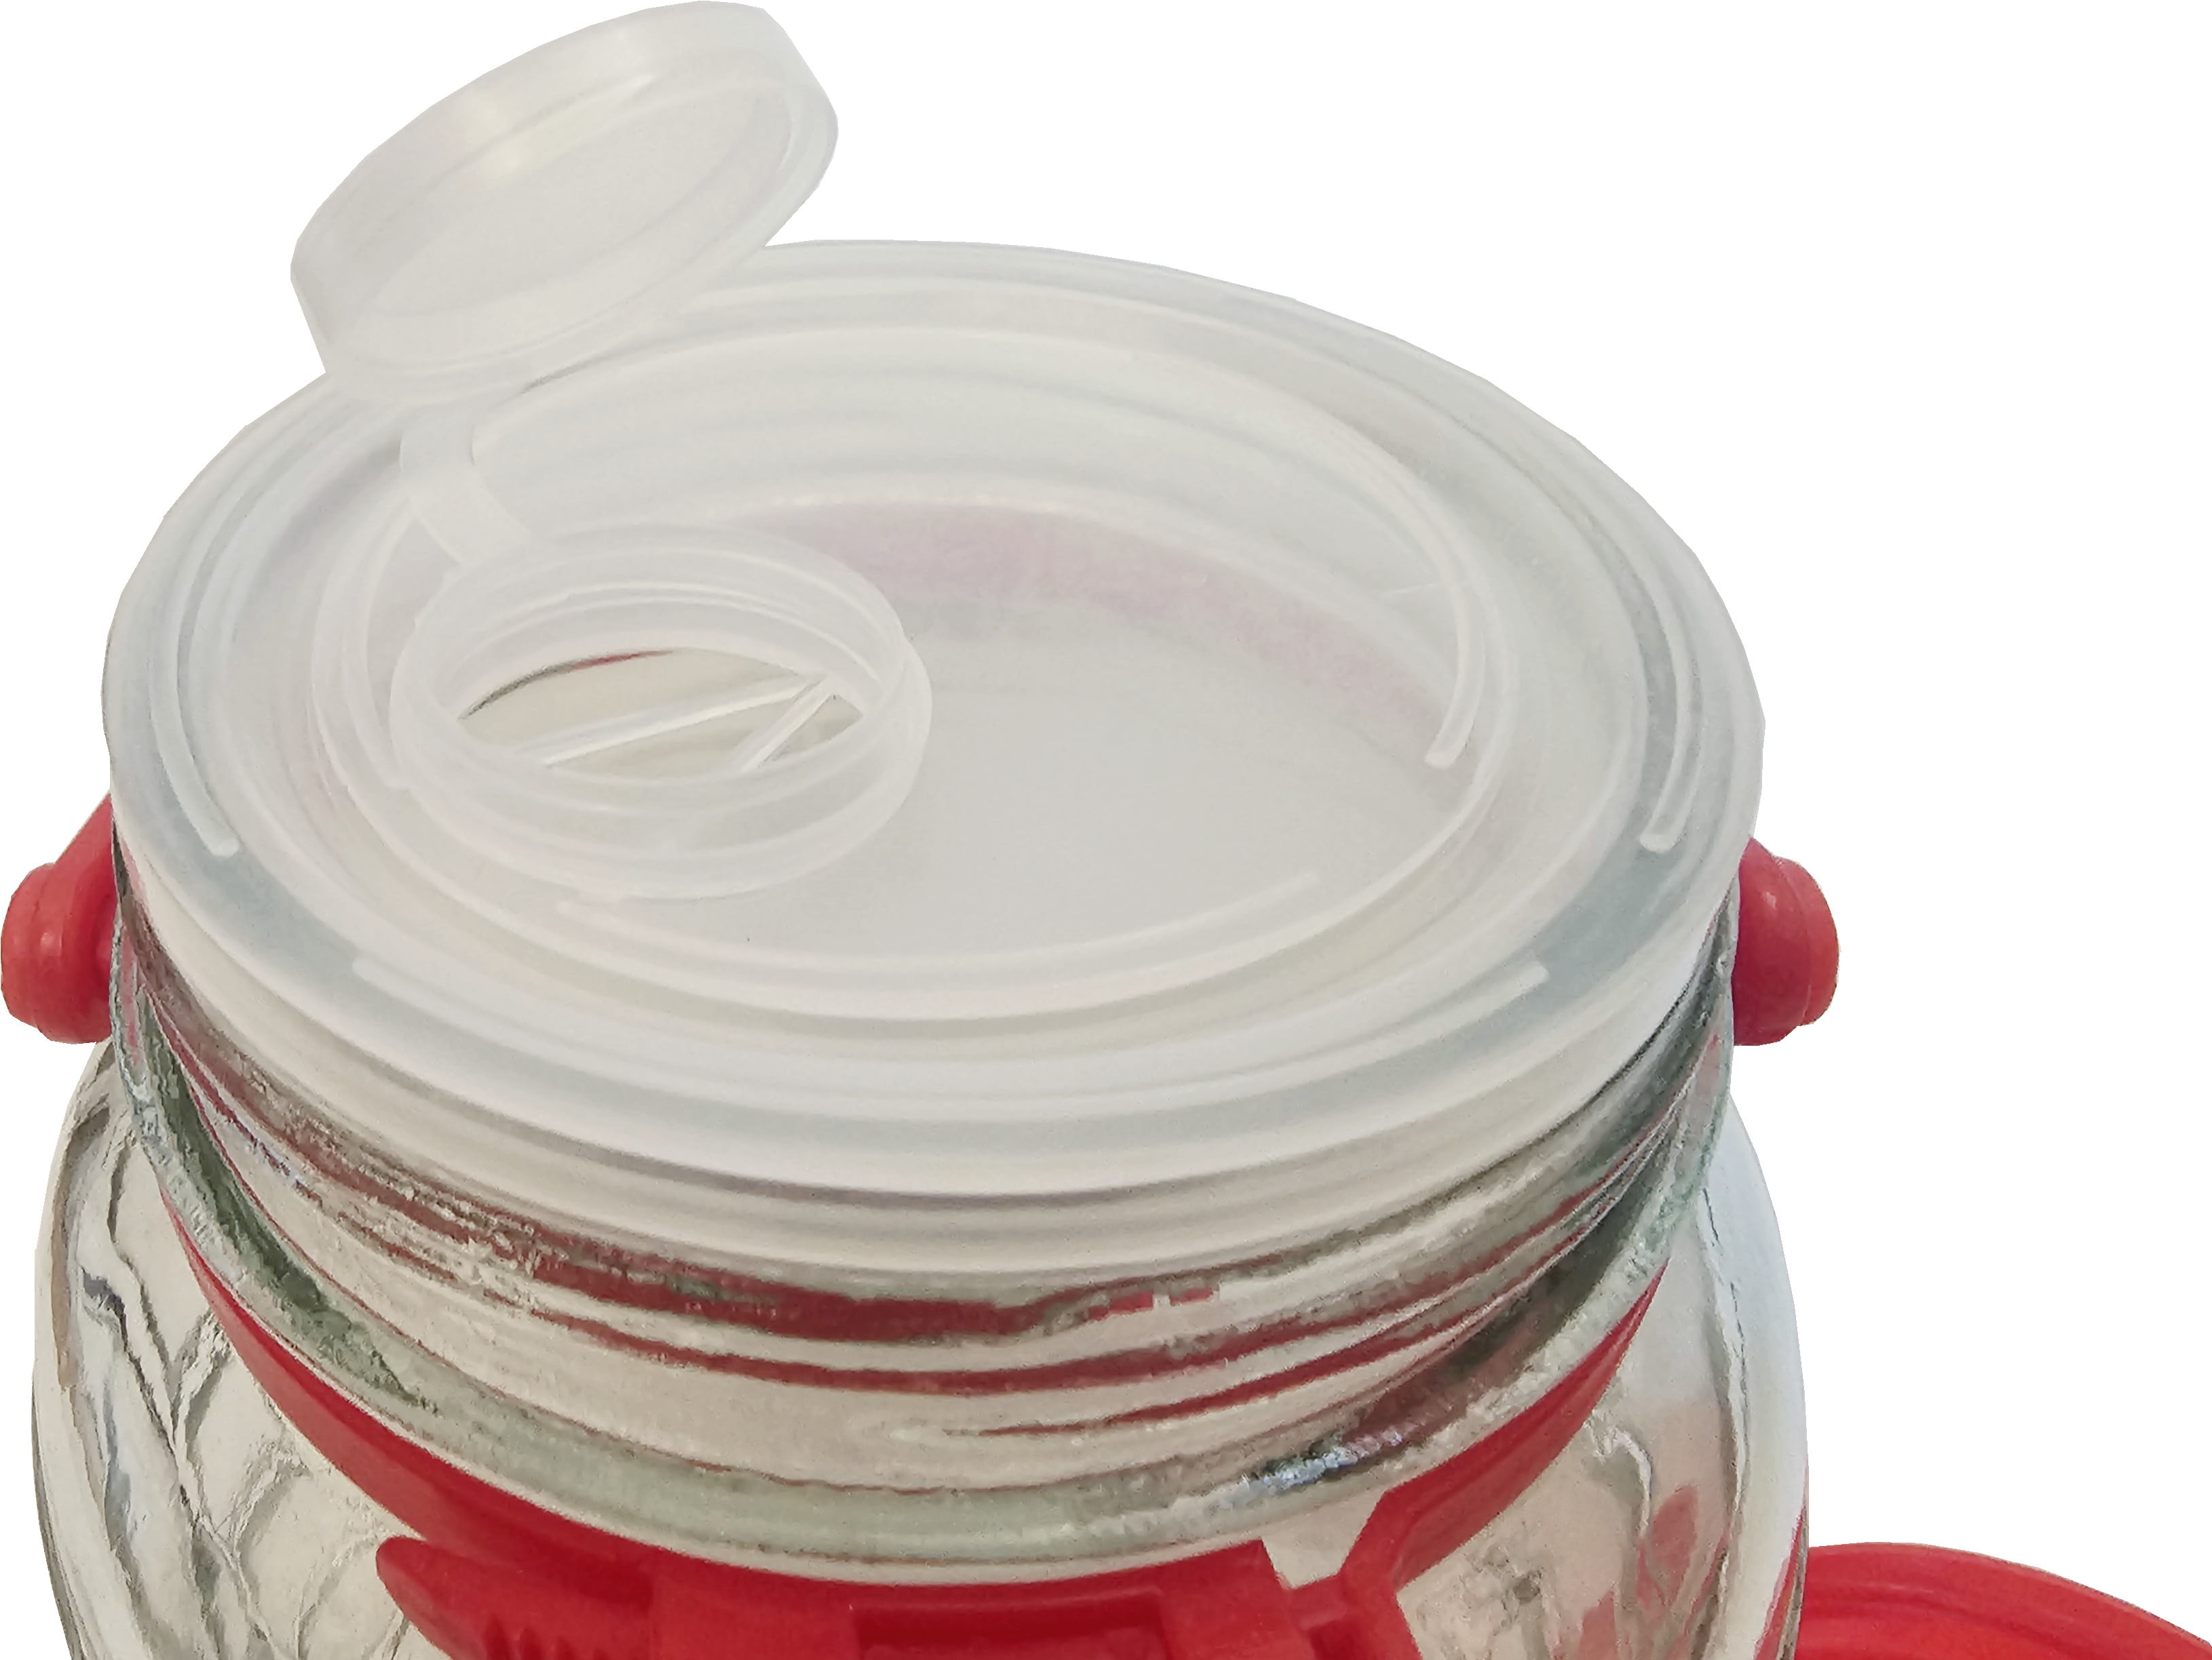 AGtrade 1 Gallon Glass Jar with Lid Wide Mouth Airtight Plastic Pour Spout Lids Bulk-Dry Food Storage Pickling Mason Jar Canister Raw Milk Bottle Jug